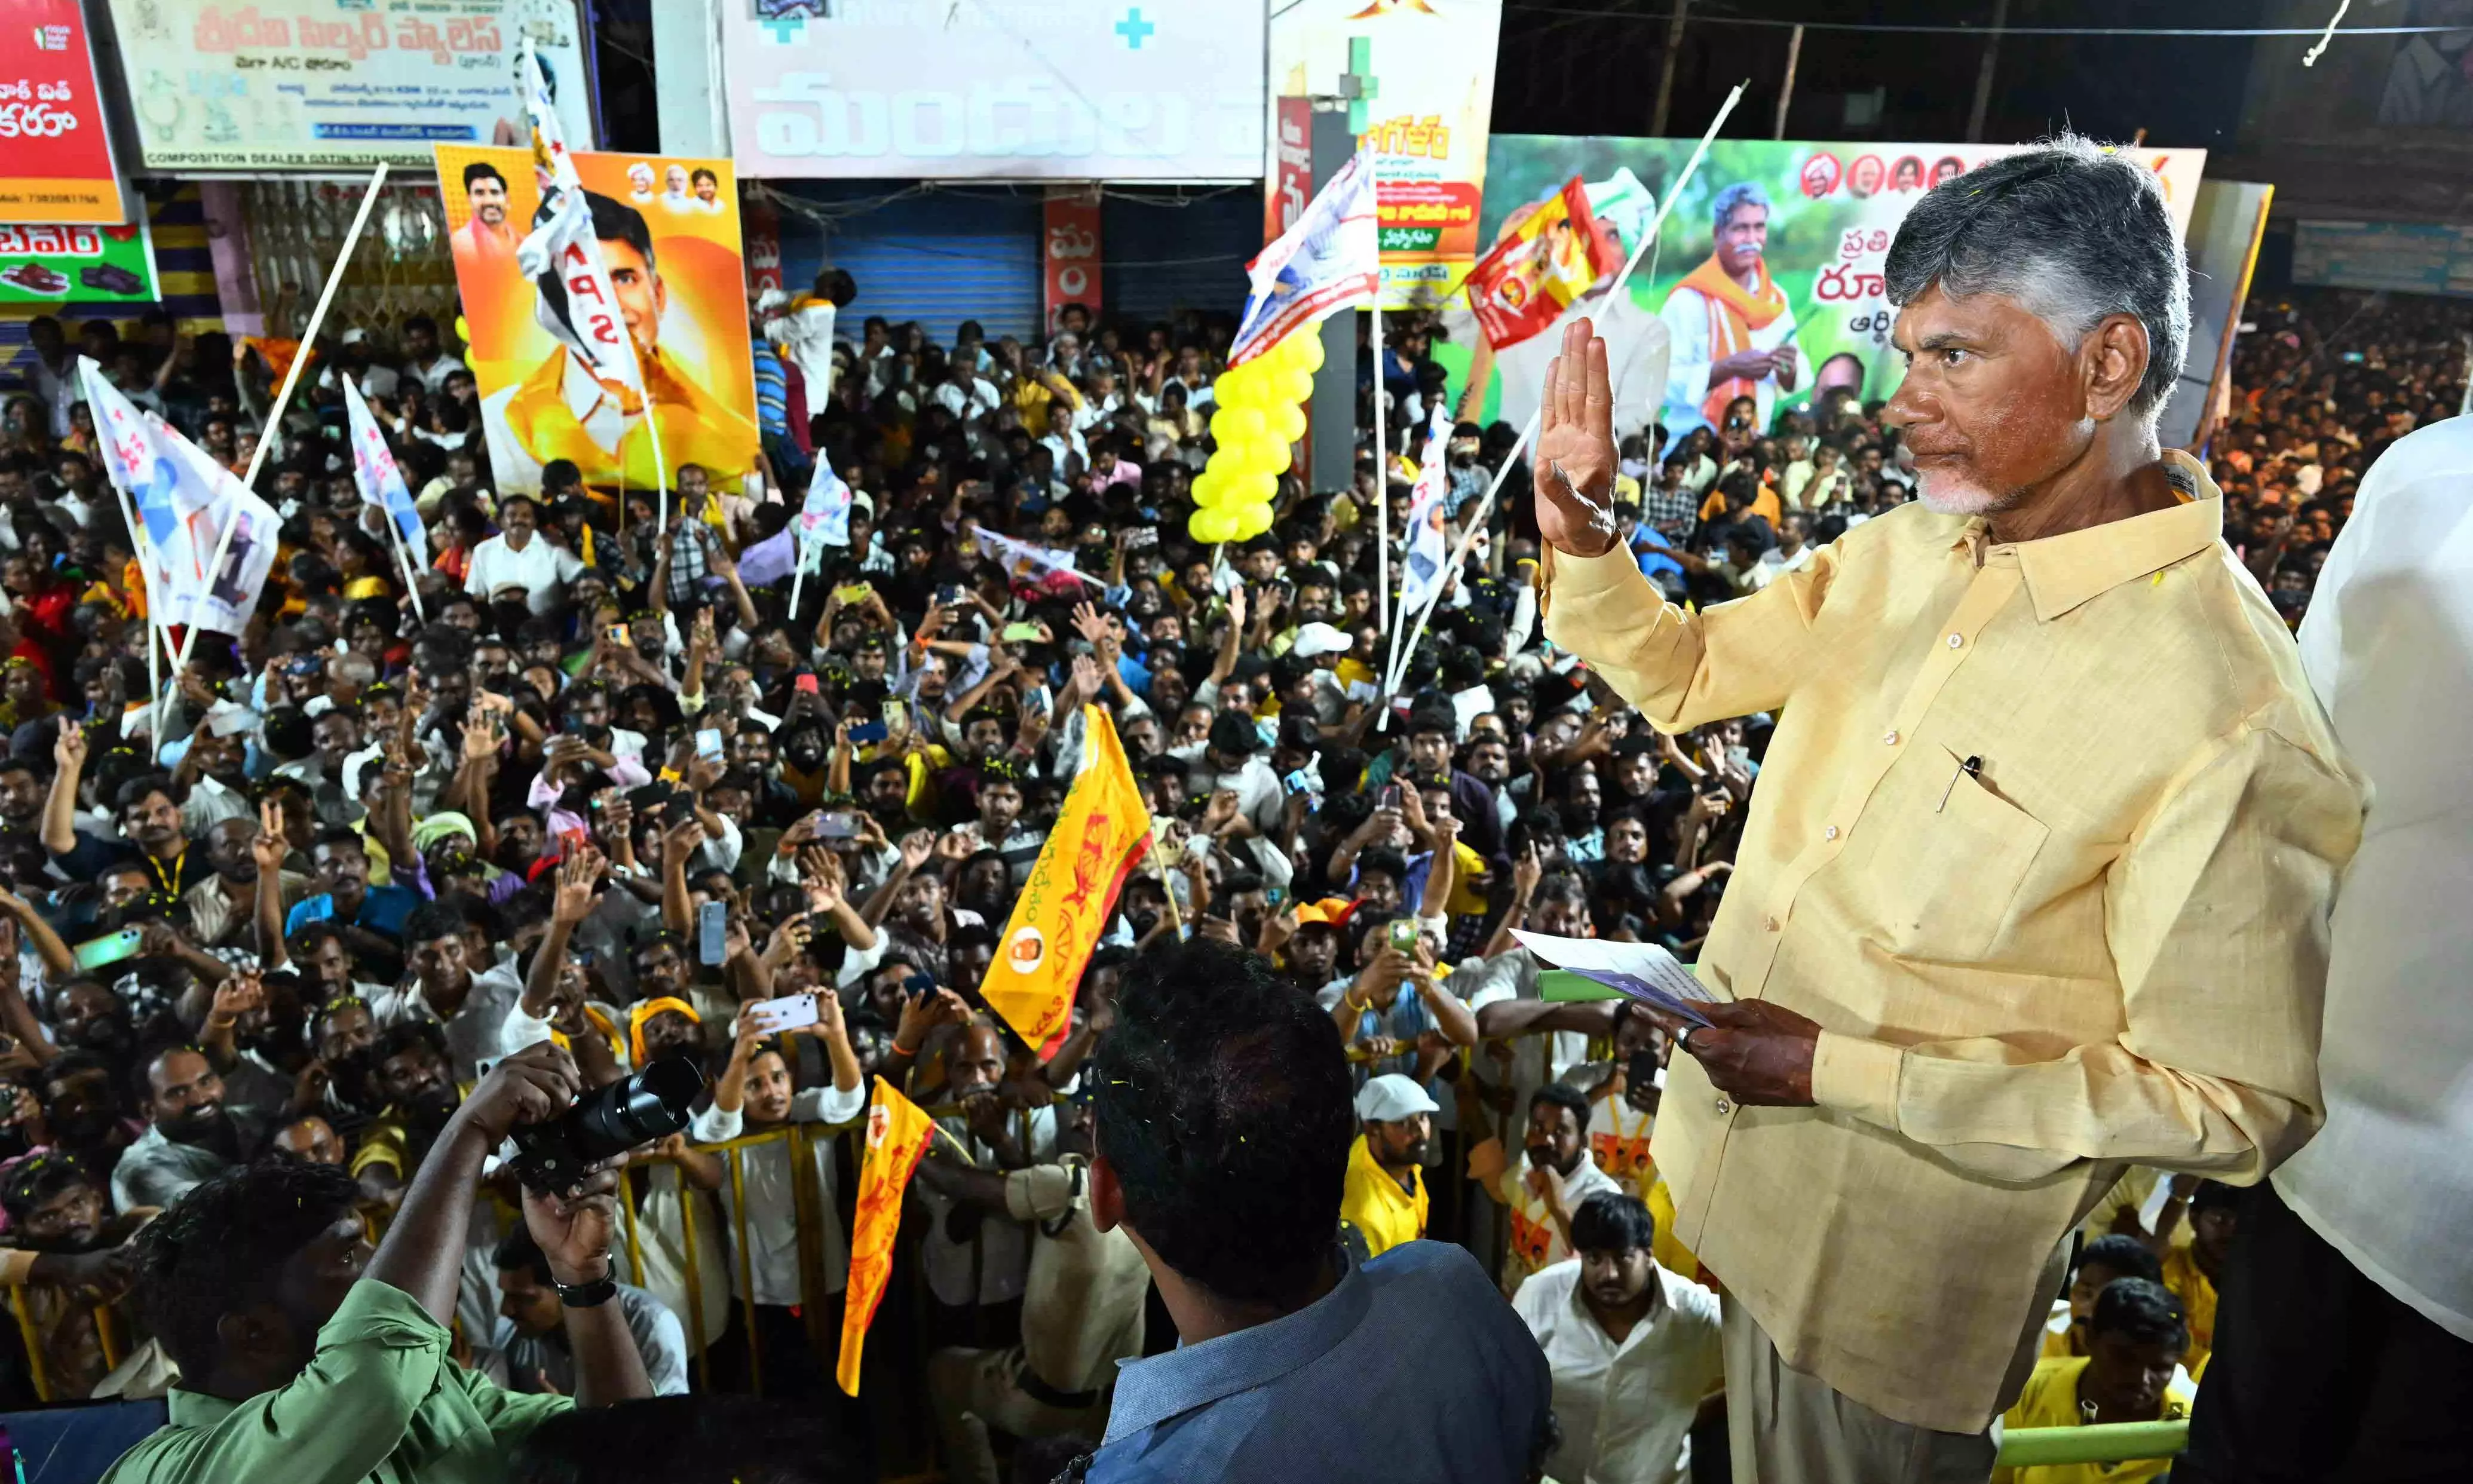 Naidu promises to restore law and order, terms YSRCs Fan symbol fit for dustbin